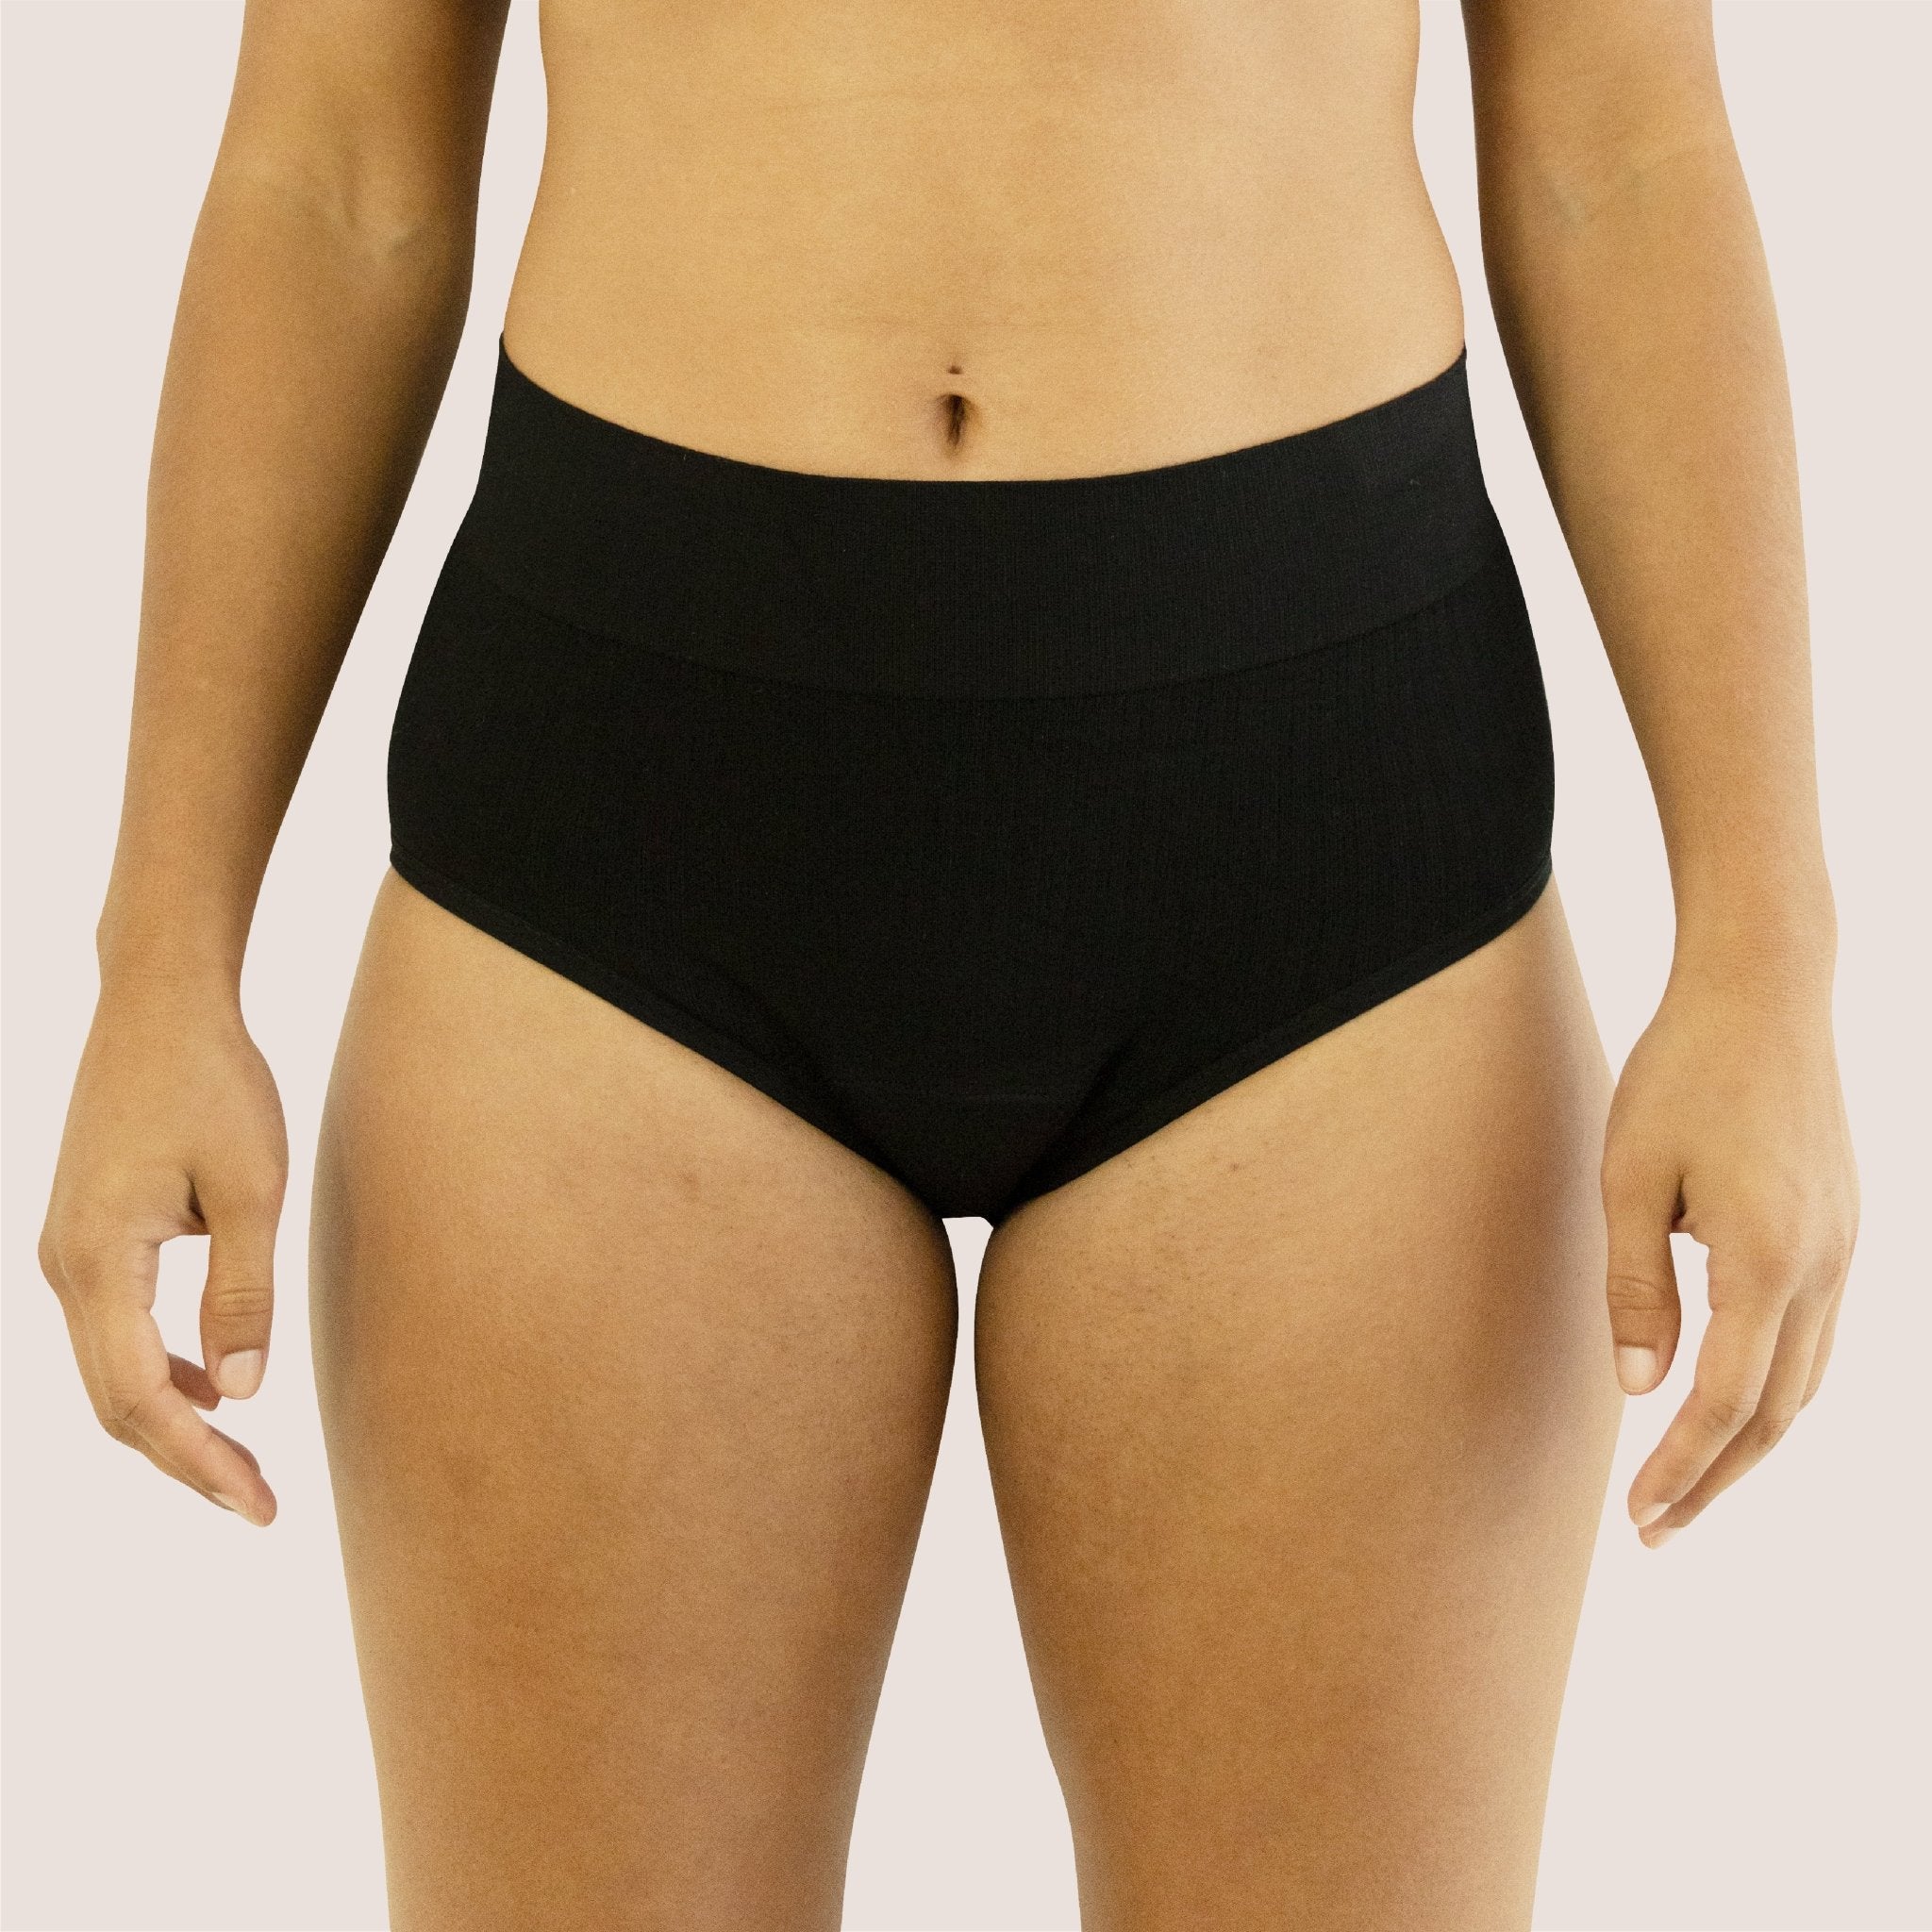 Confortide Seamless Ultra-Absorbent High-Waisted Period Panties